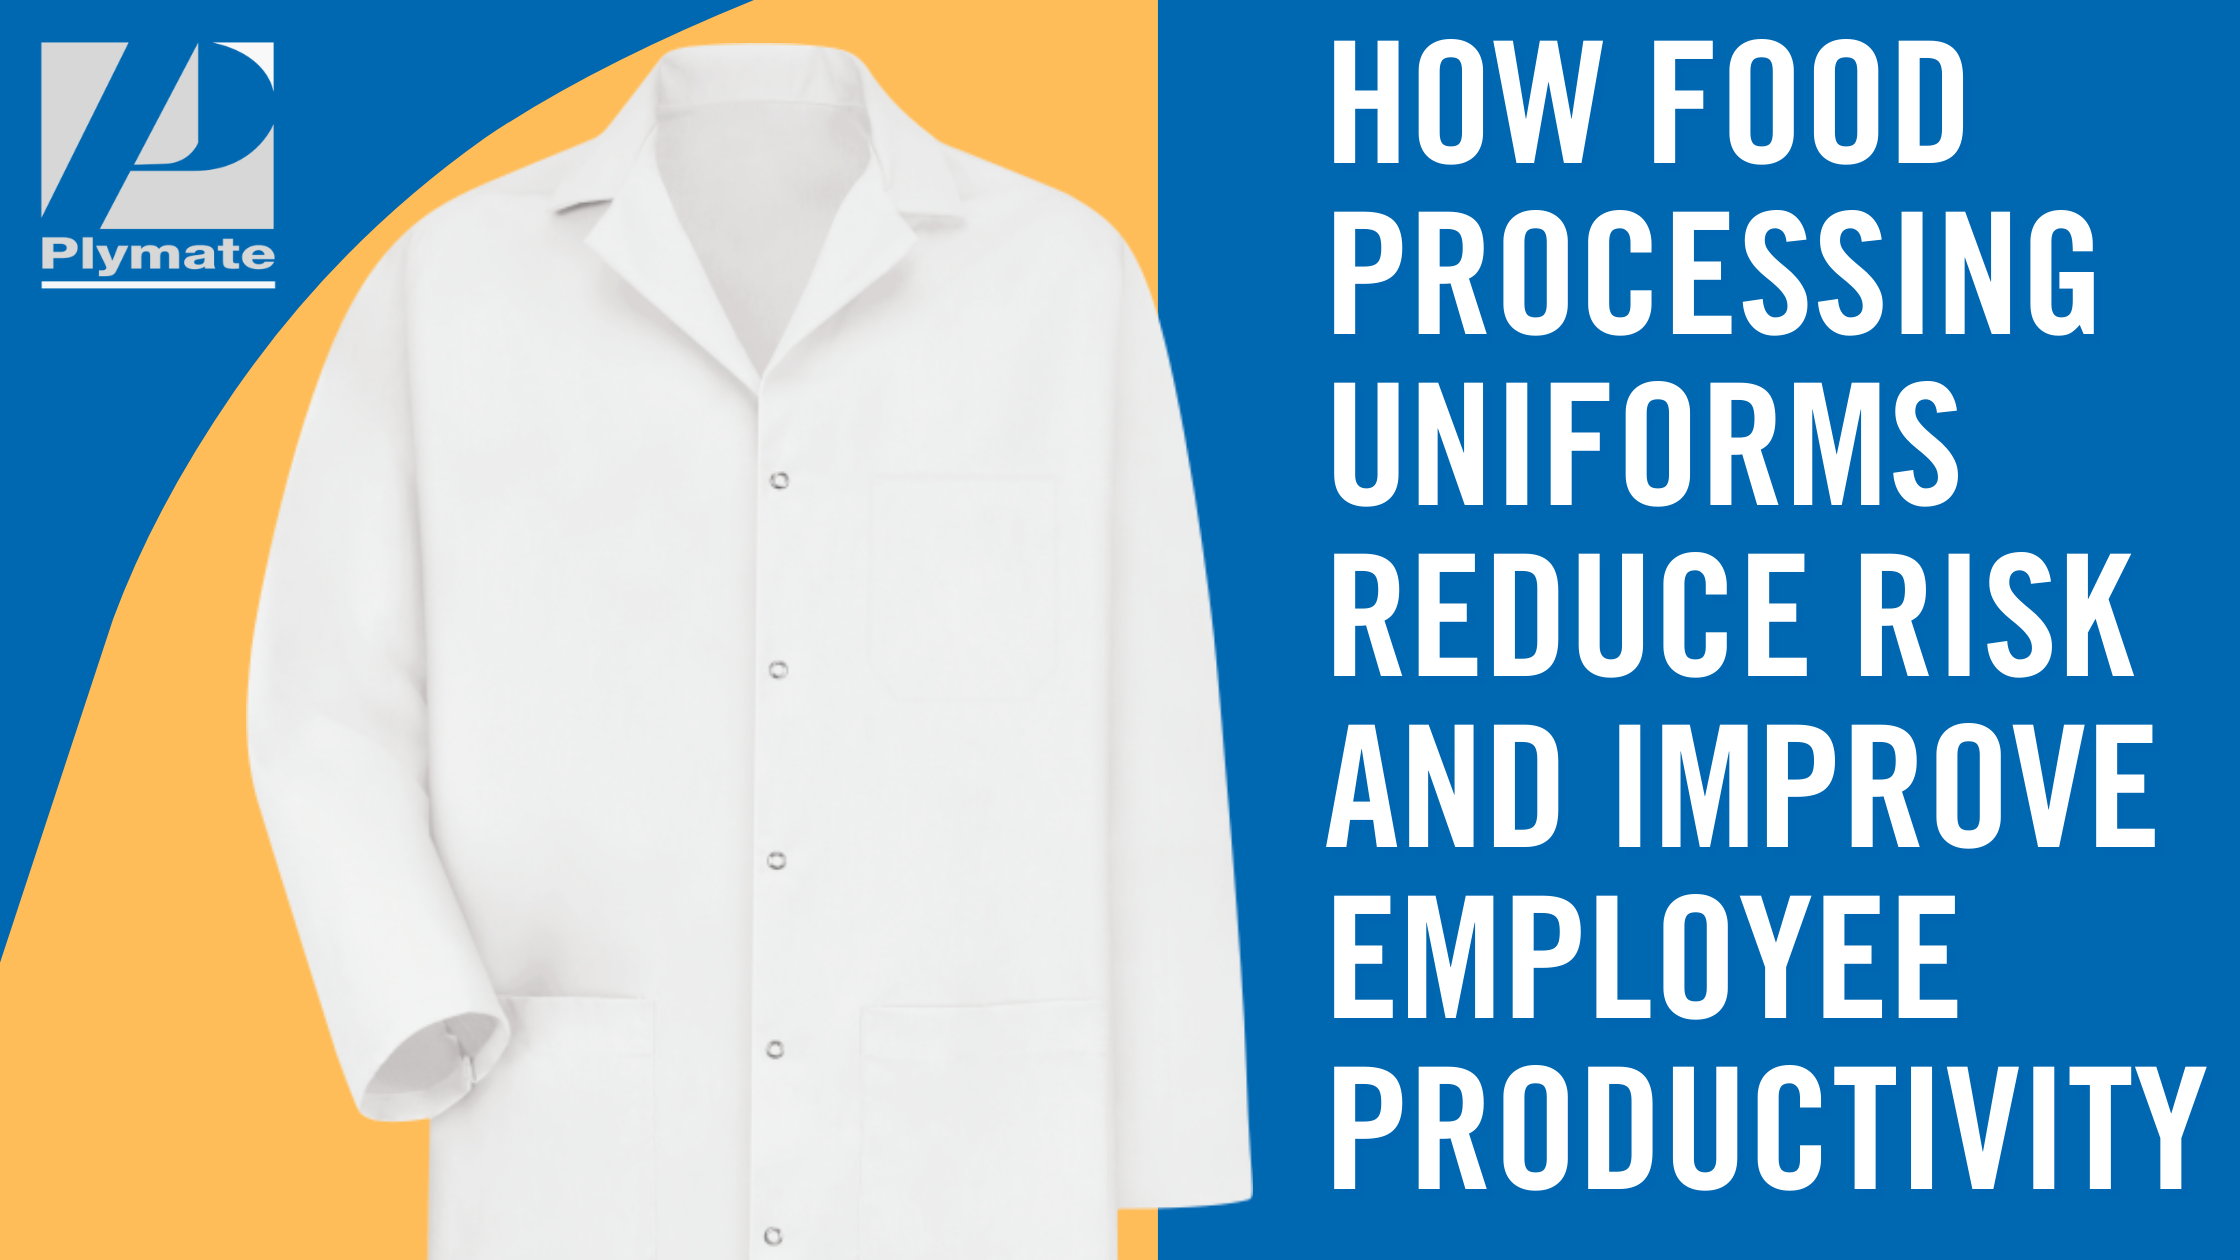 How food processing uniforms can reduce risk and improve employee productivity